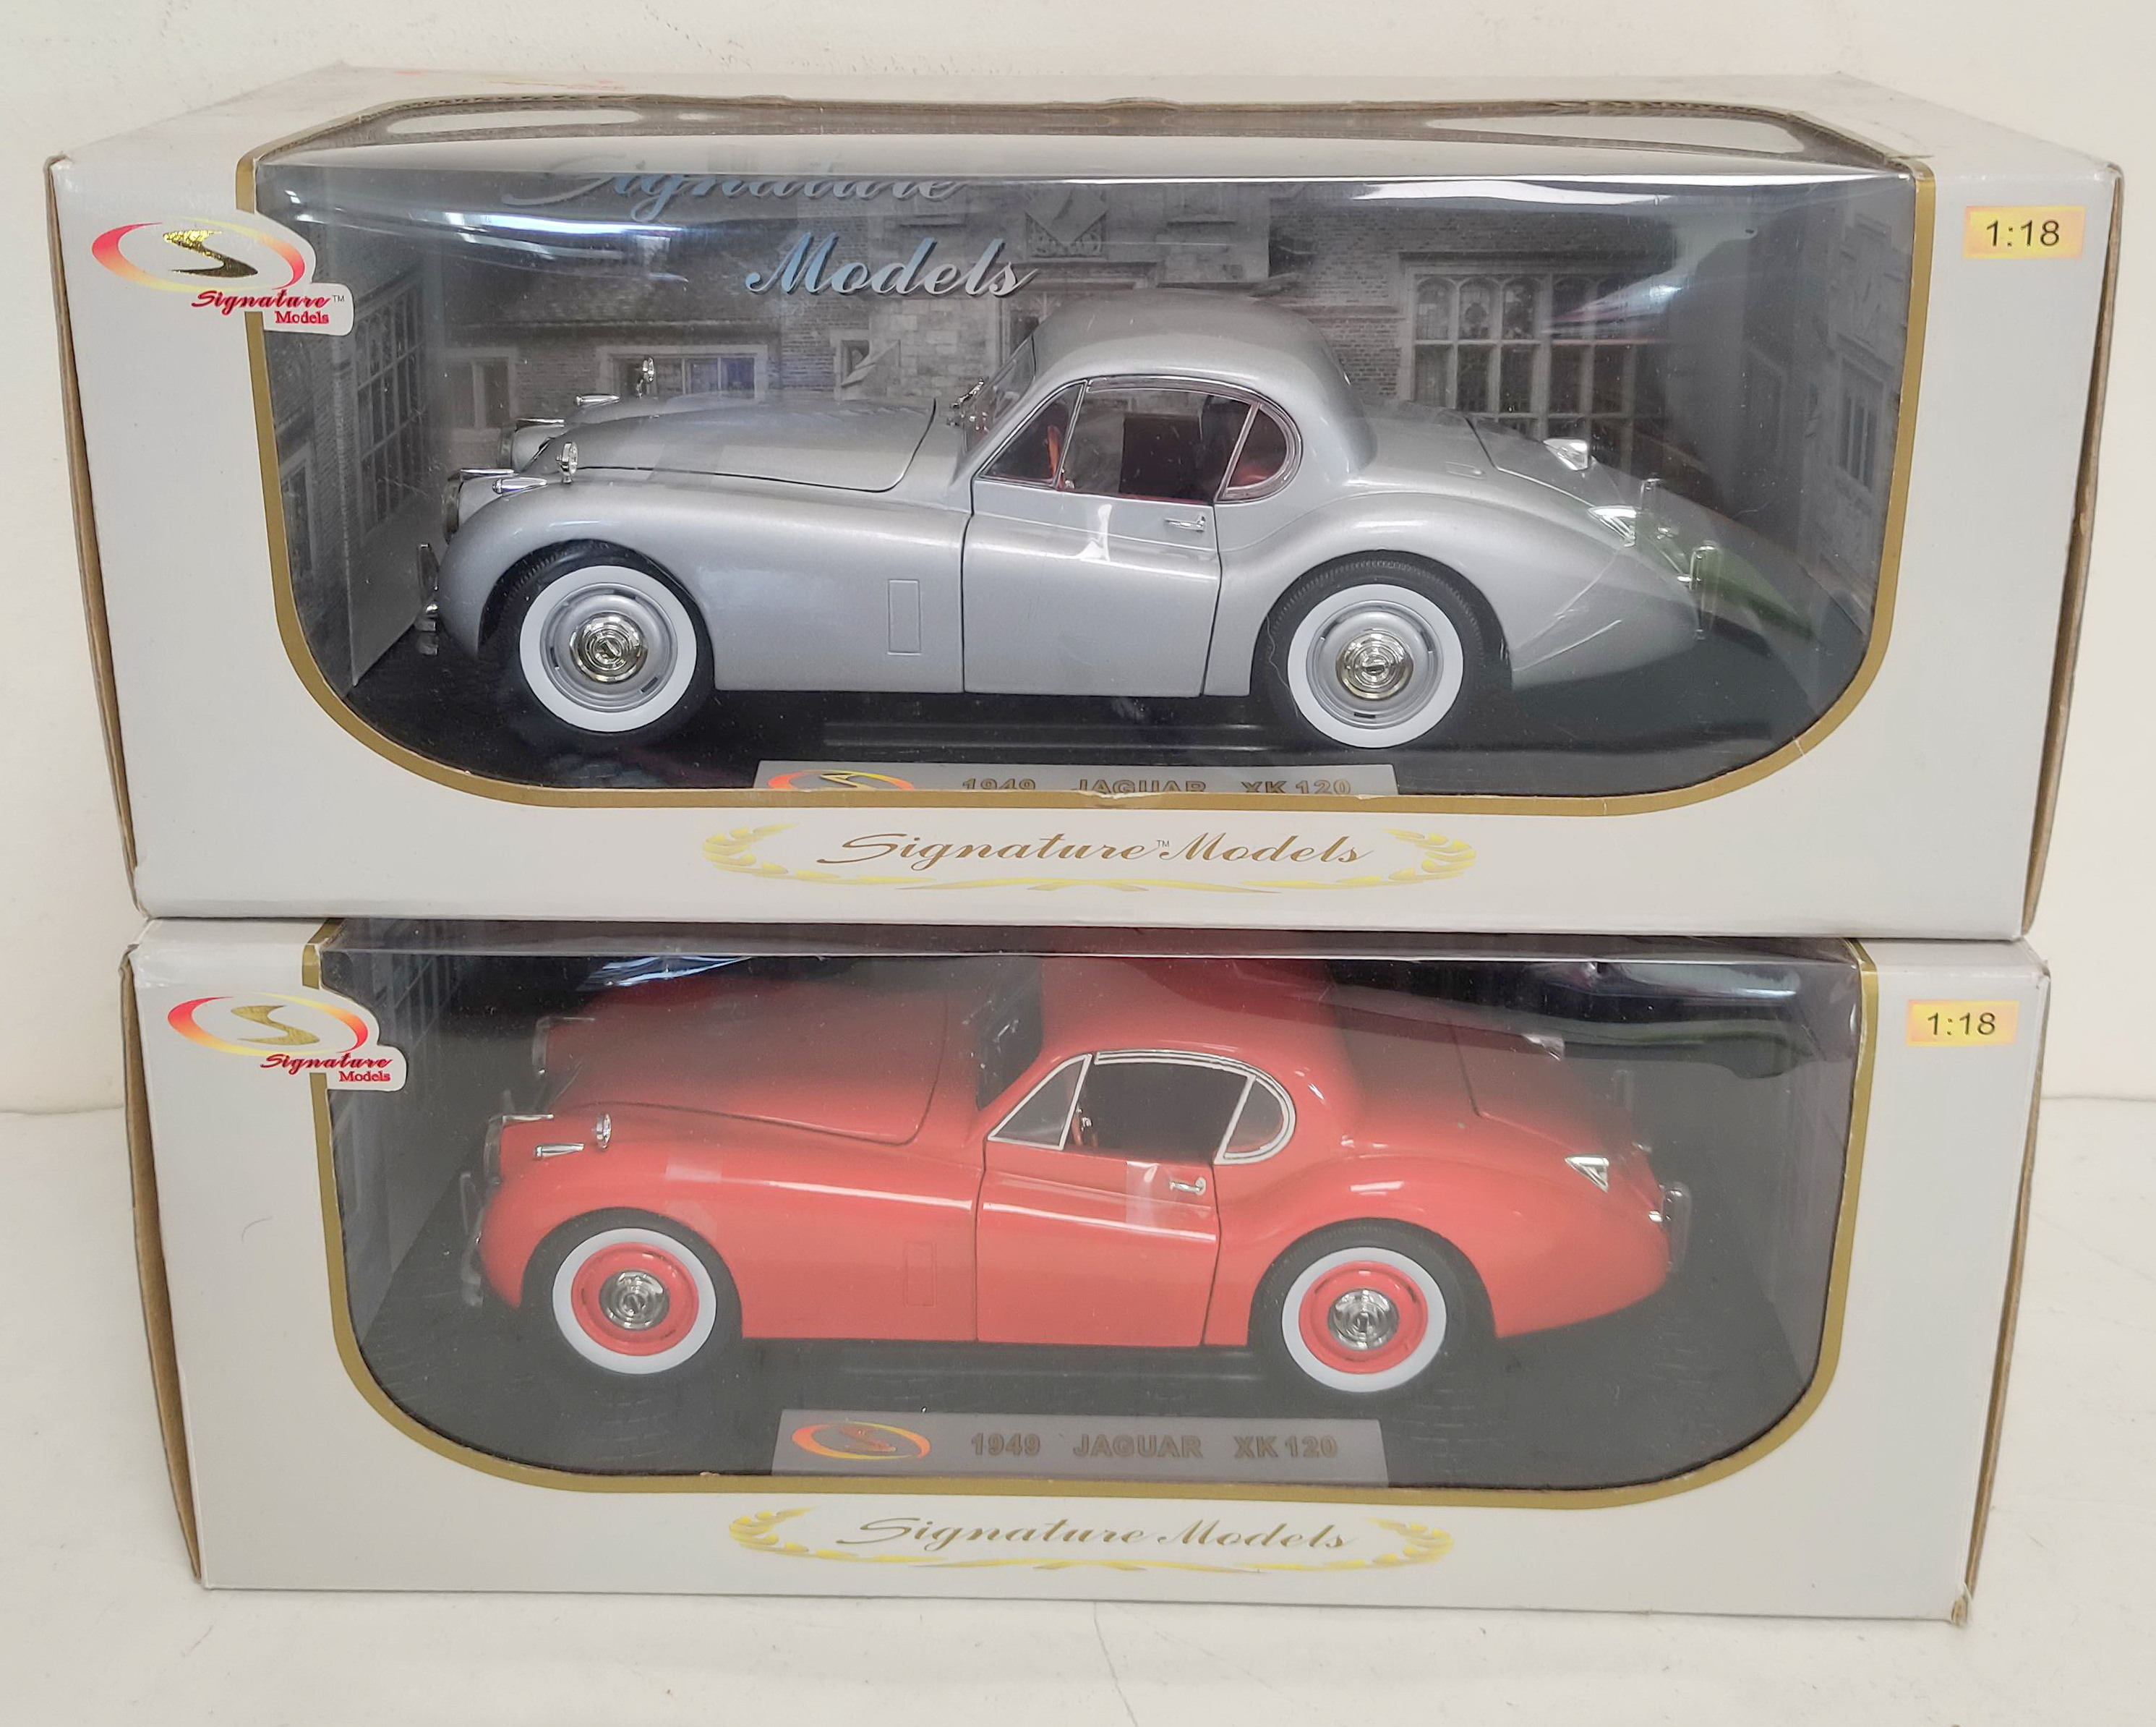 Two Signature Models 1:18 scale boxed die cast model vehicles. To include a 1949 Jaguar XK120 in